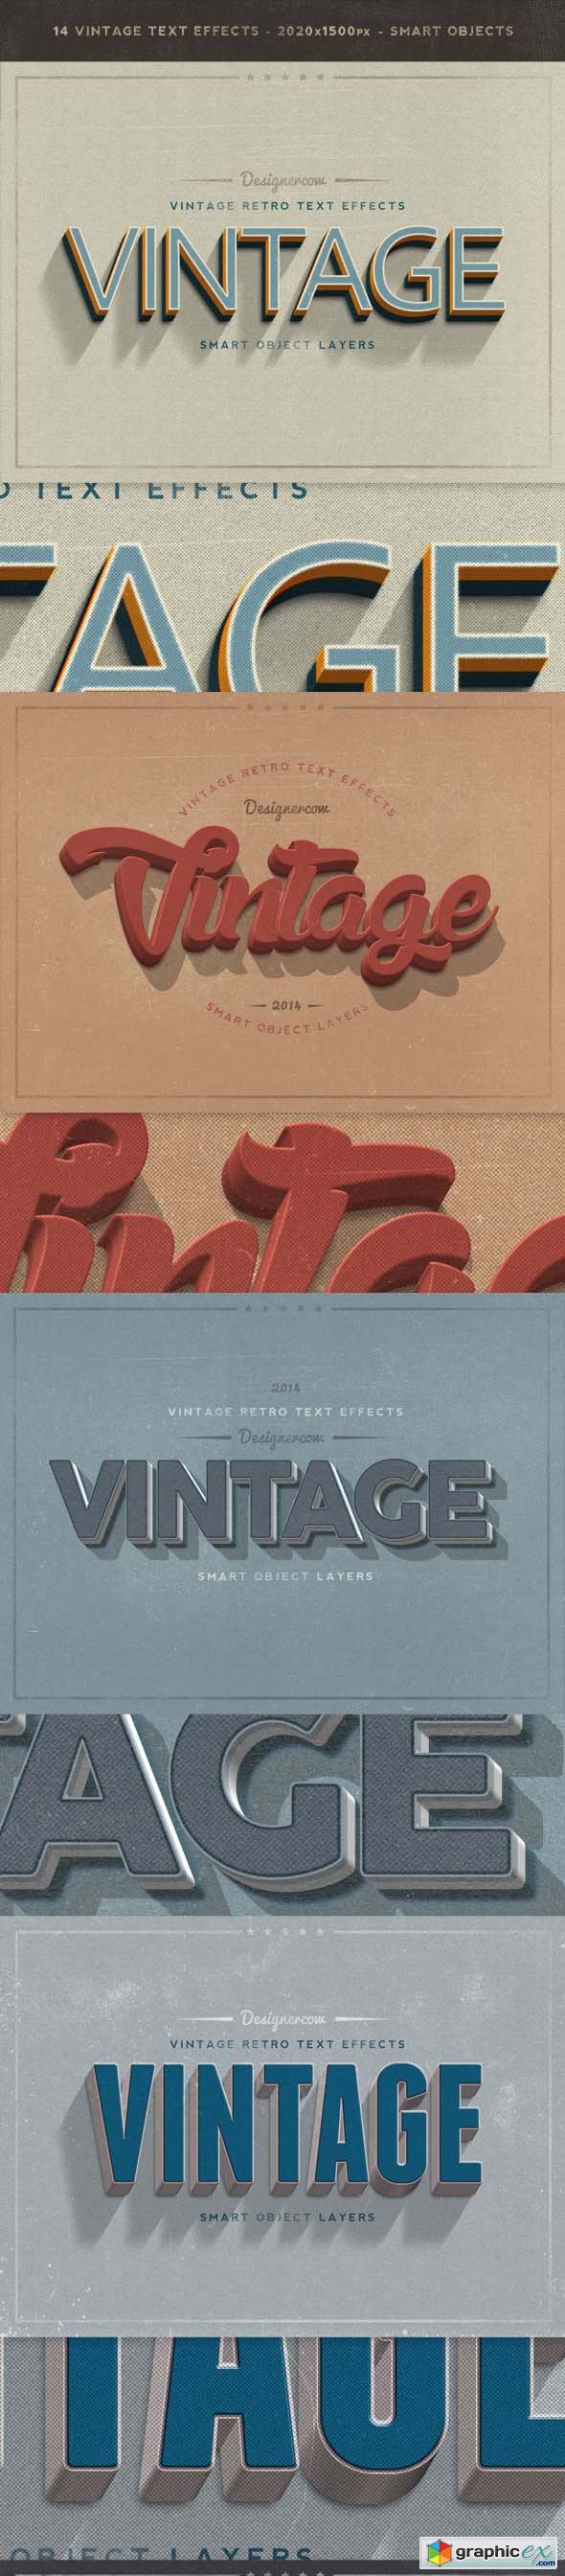 New Vintage Retro Text Effects 9373491